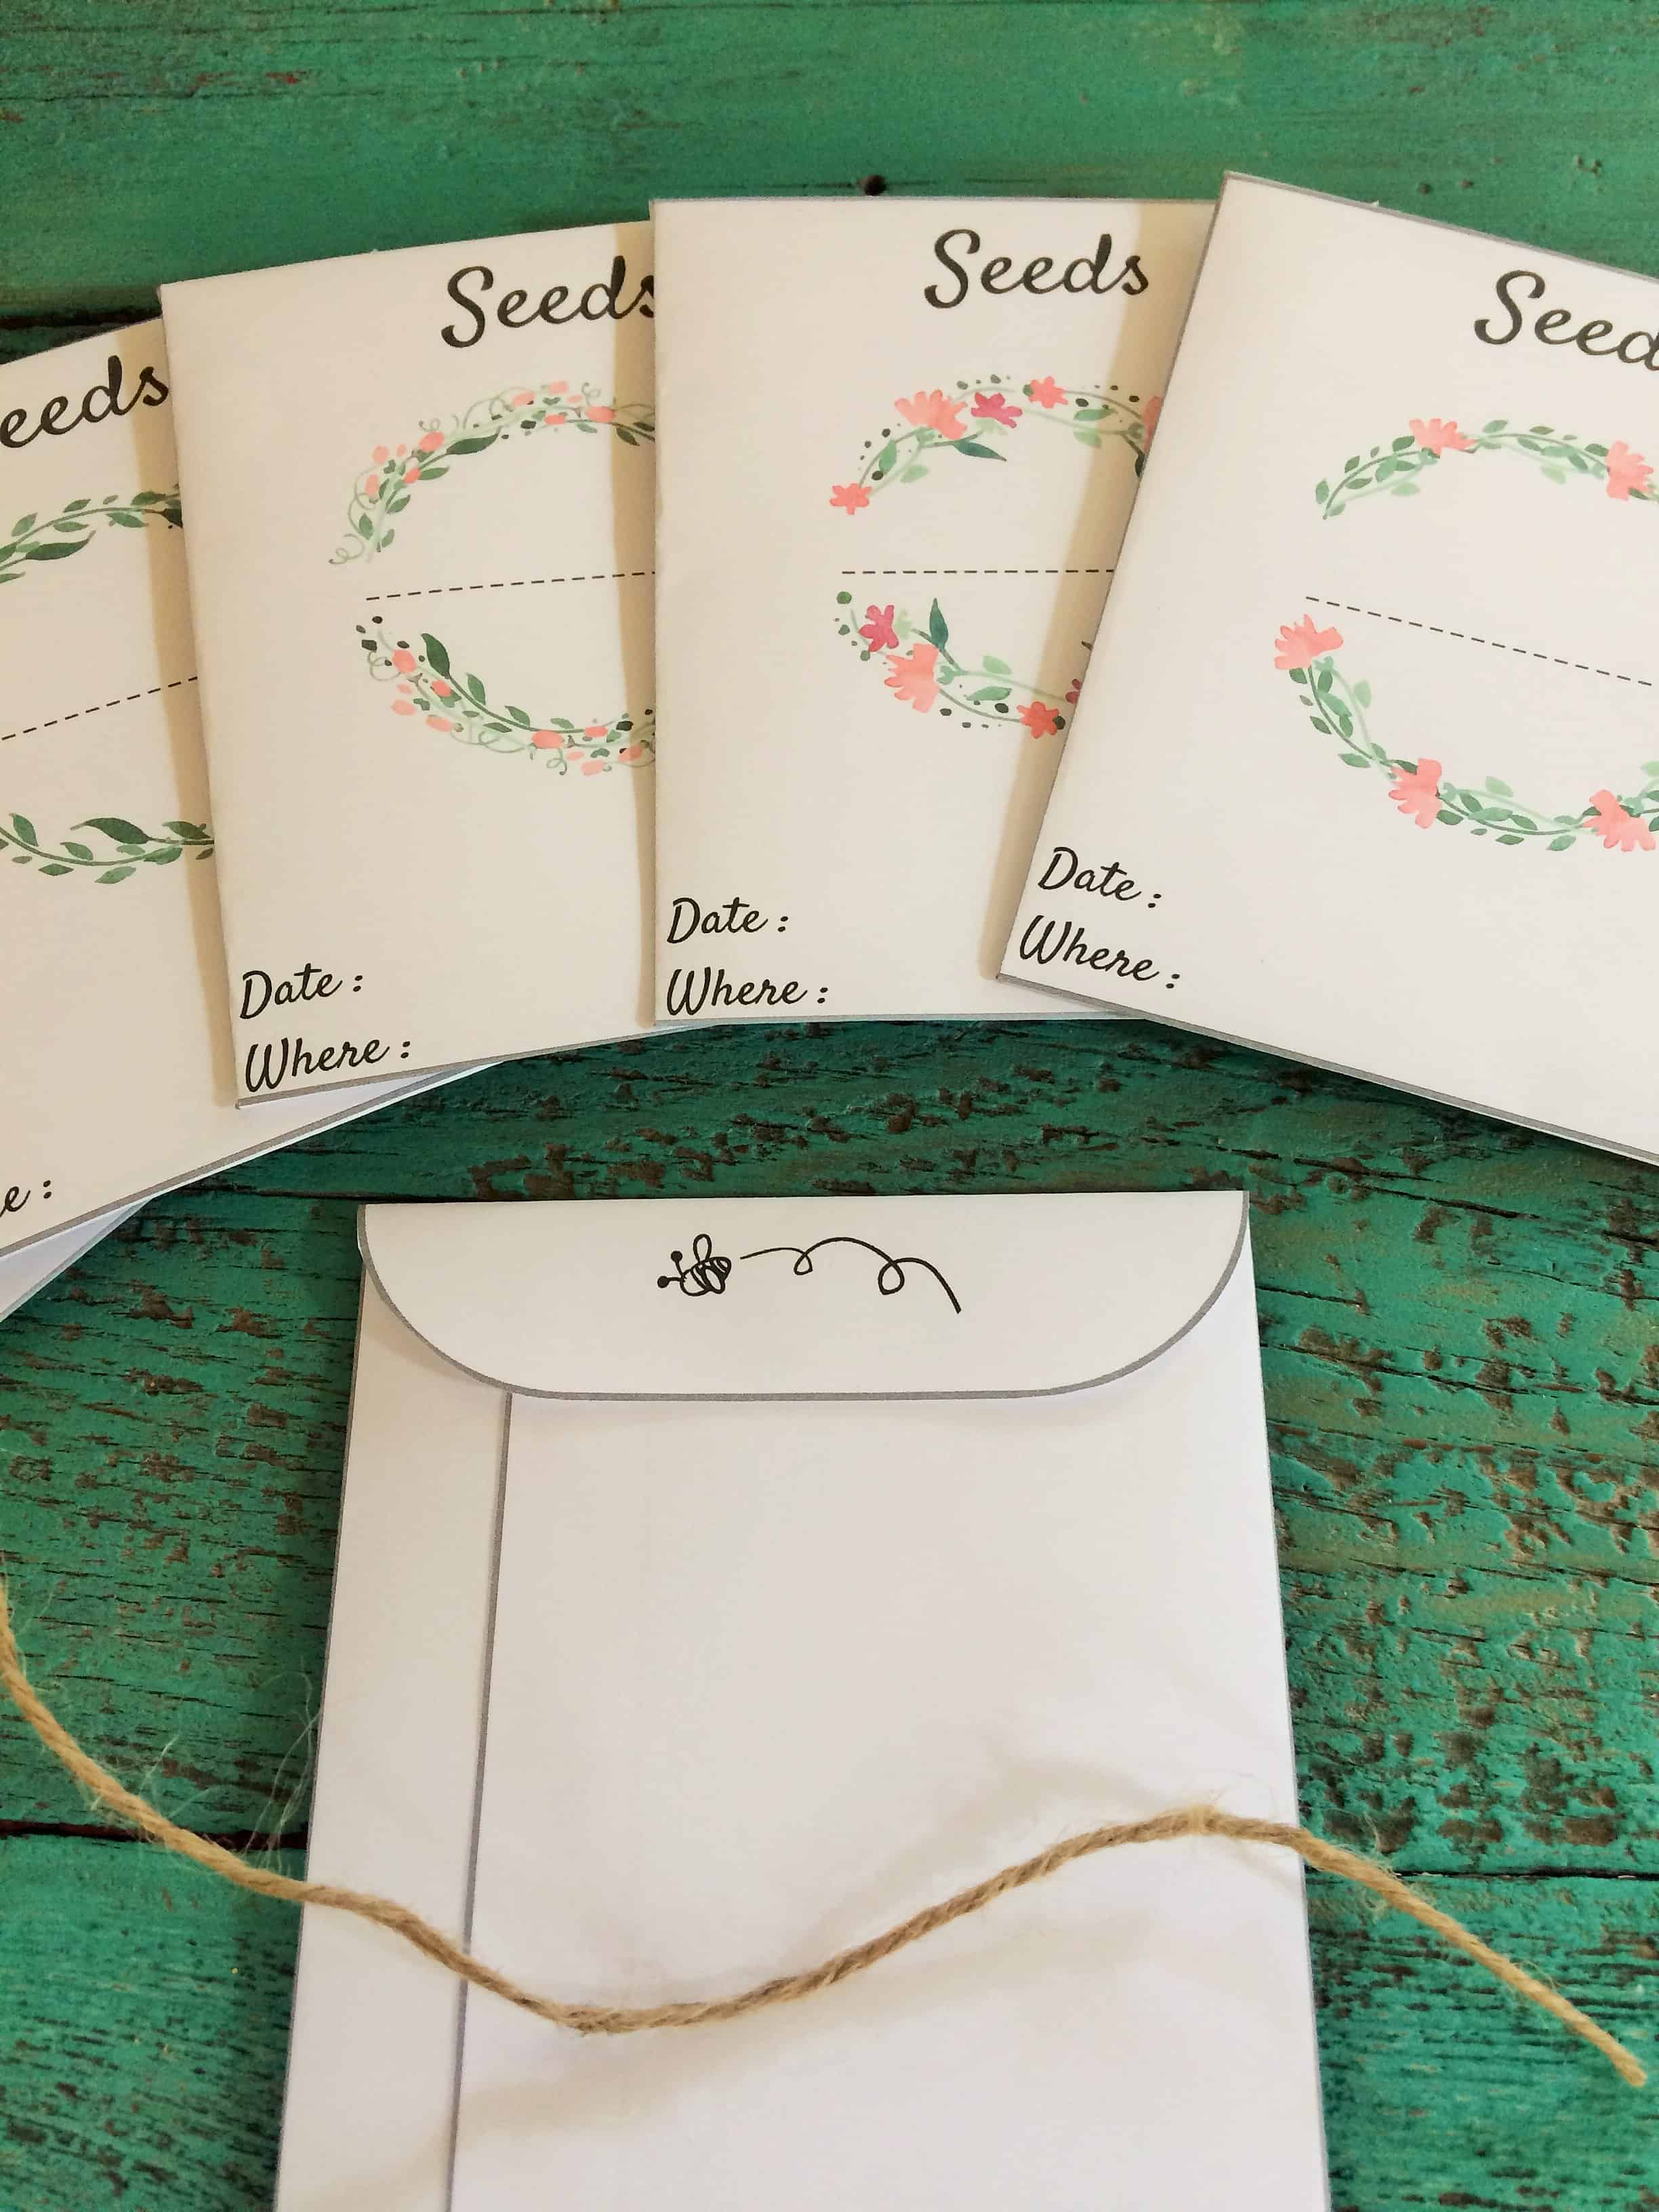 Seed Packets Seed Envelopes Seed Packet Template Seed Storage Printable Seed  Packets Seed Saving Envelopes Seed Packet Printable 